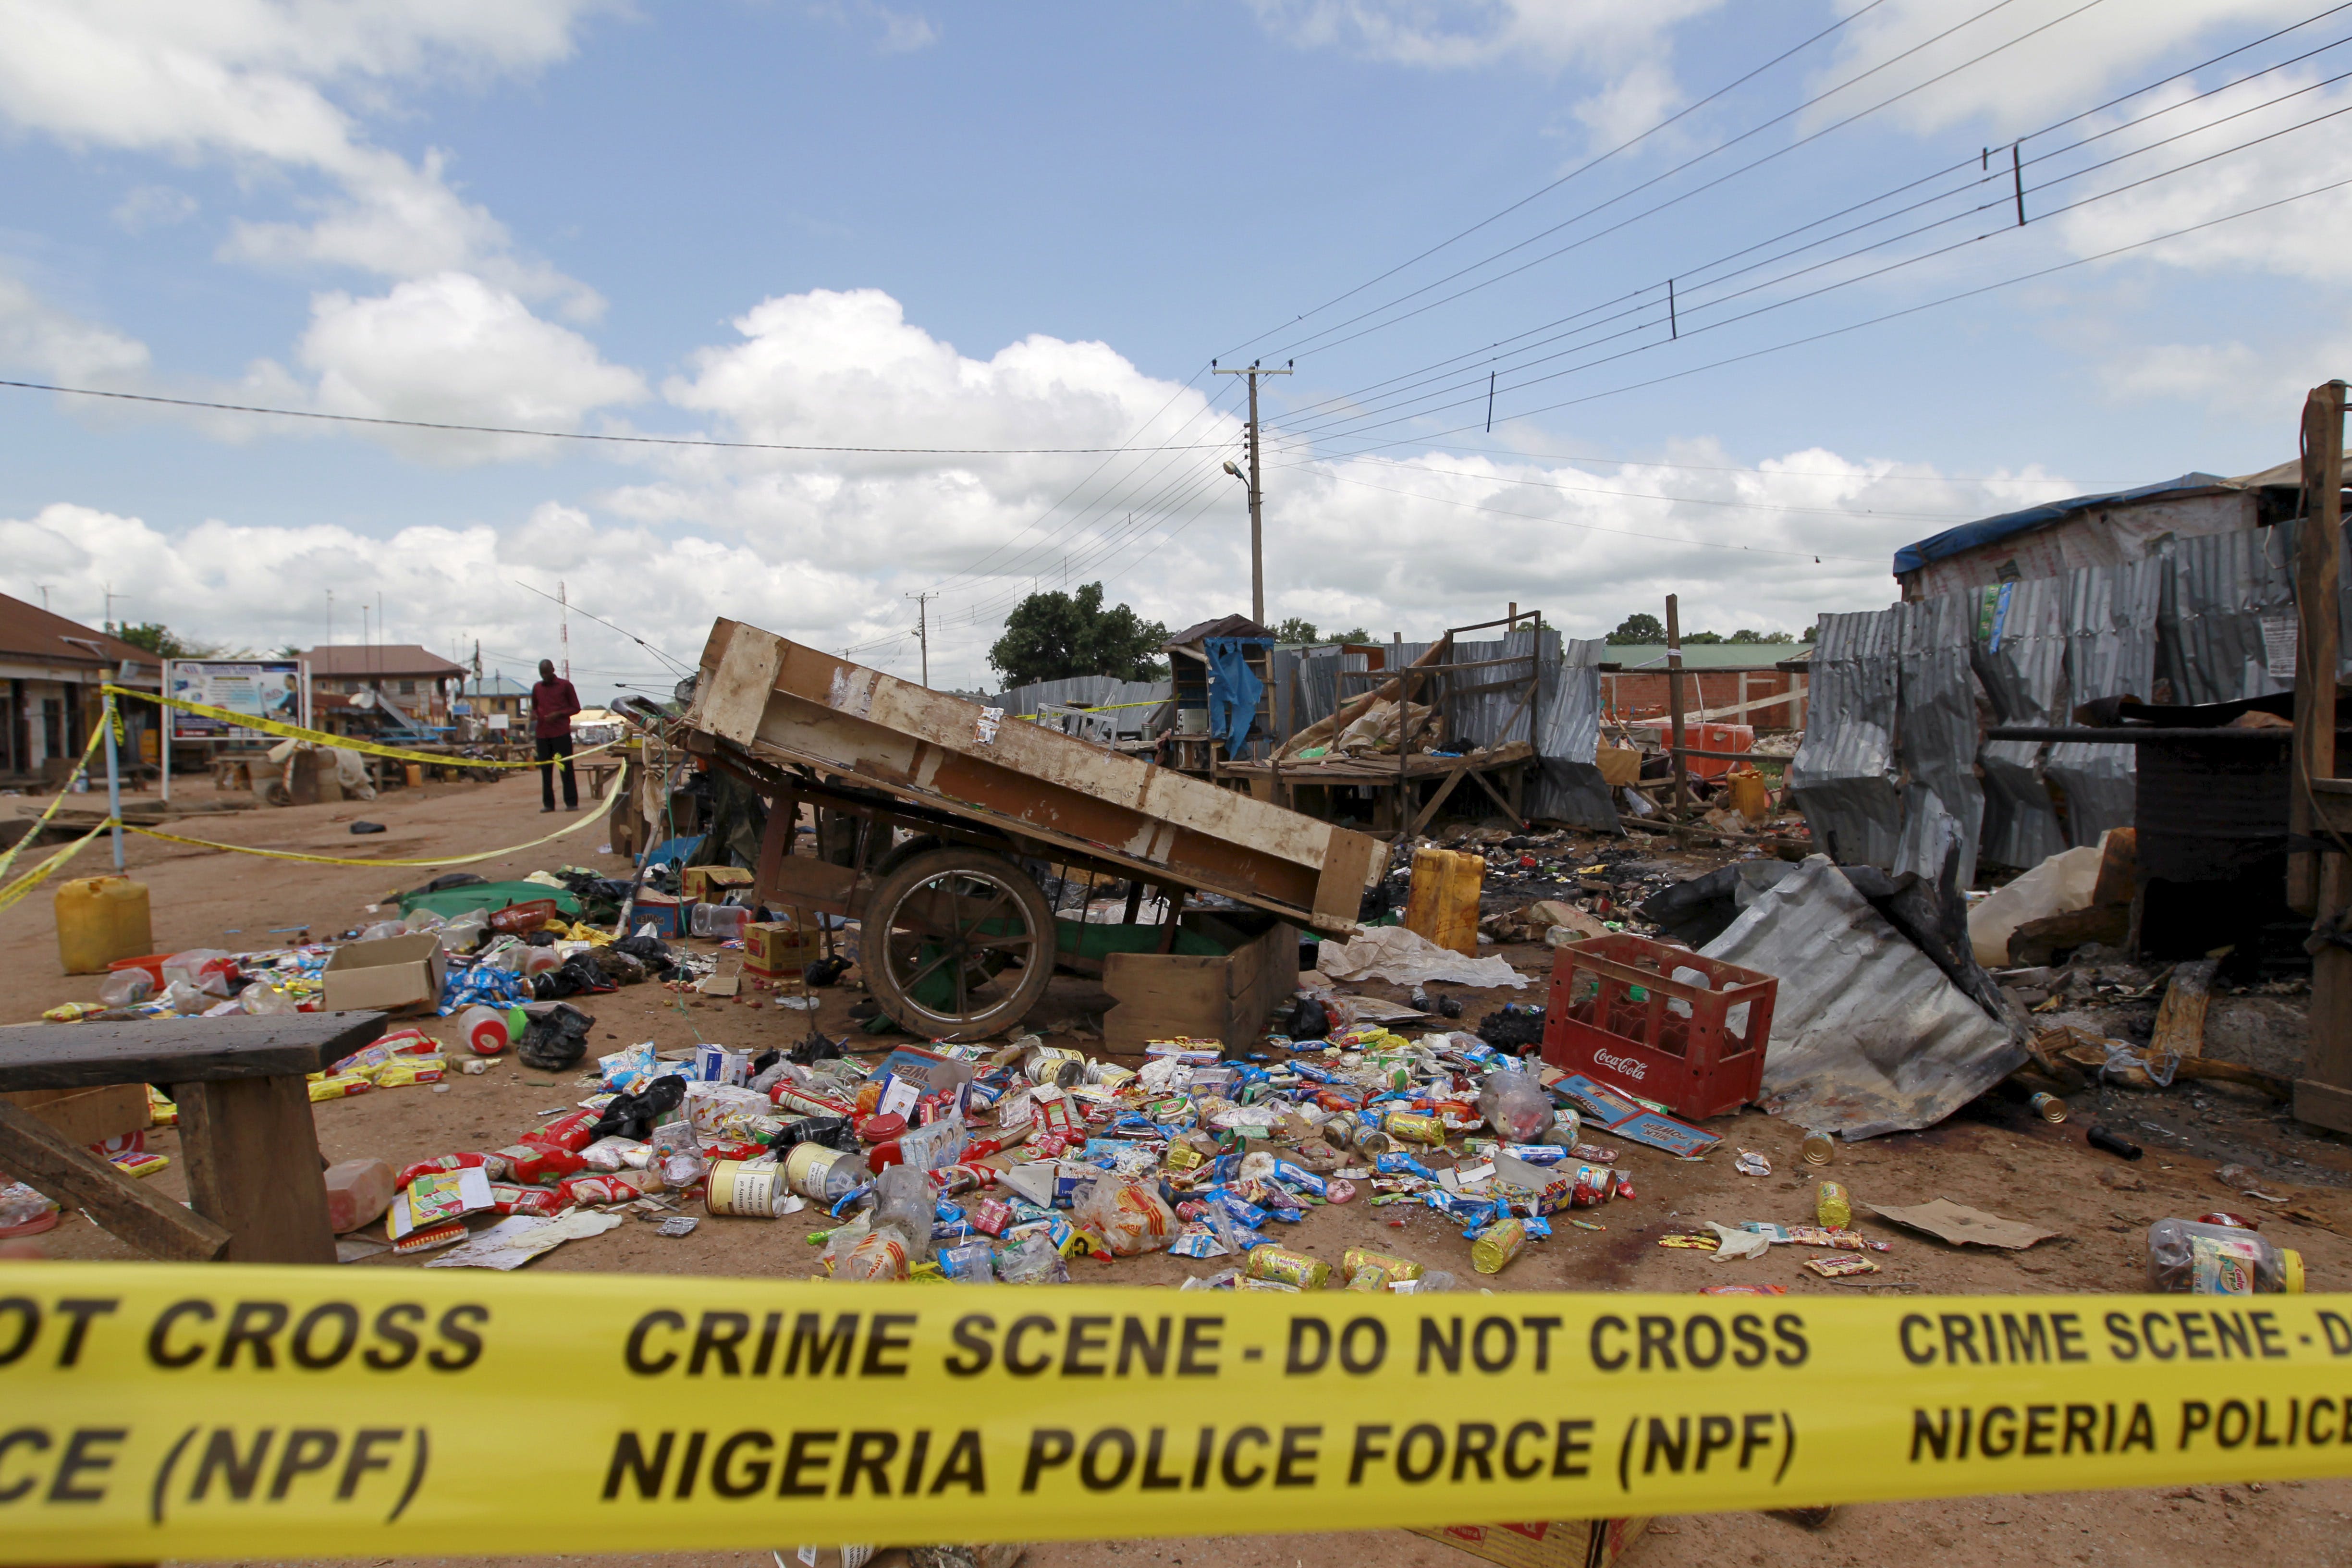 Items seen scattered on the ground at the scene of the bomb blast at Kuje market in Abuja